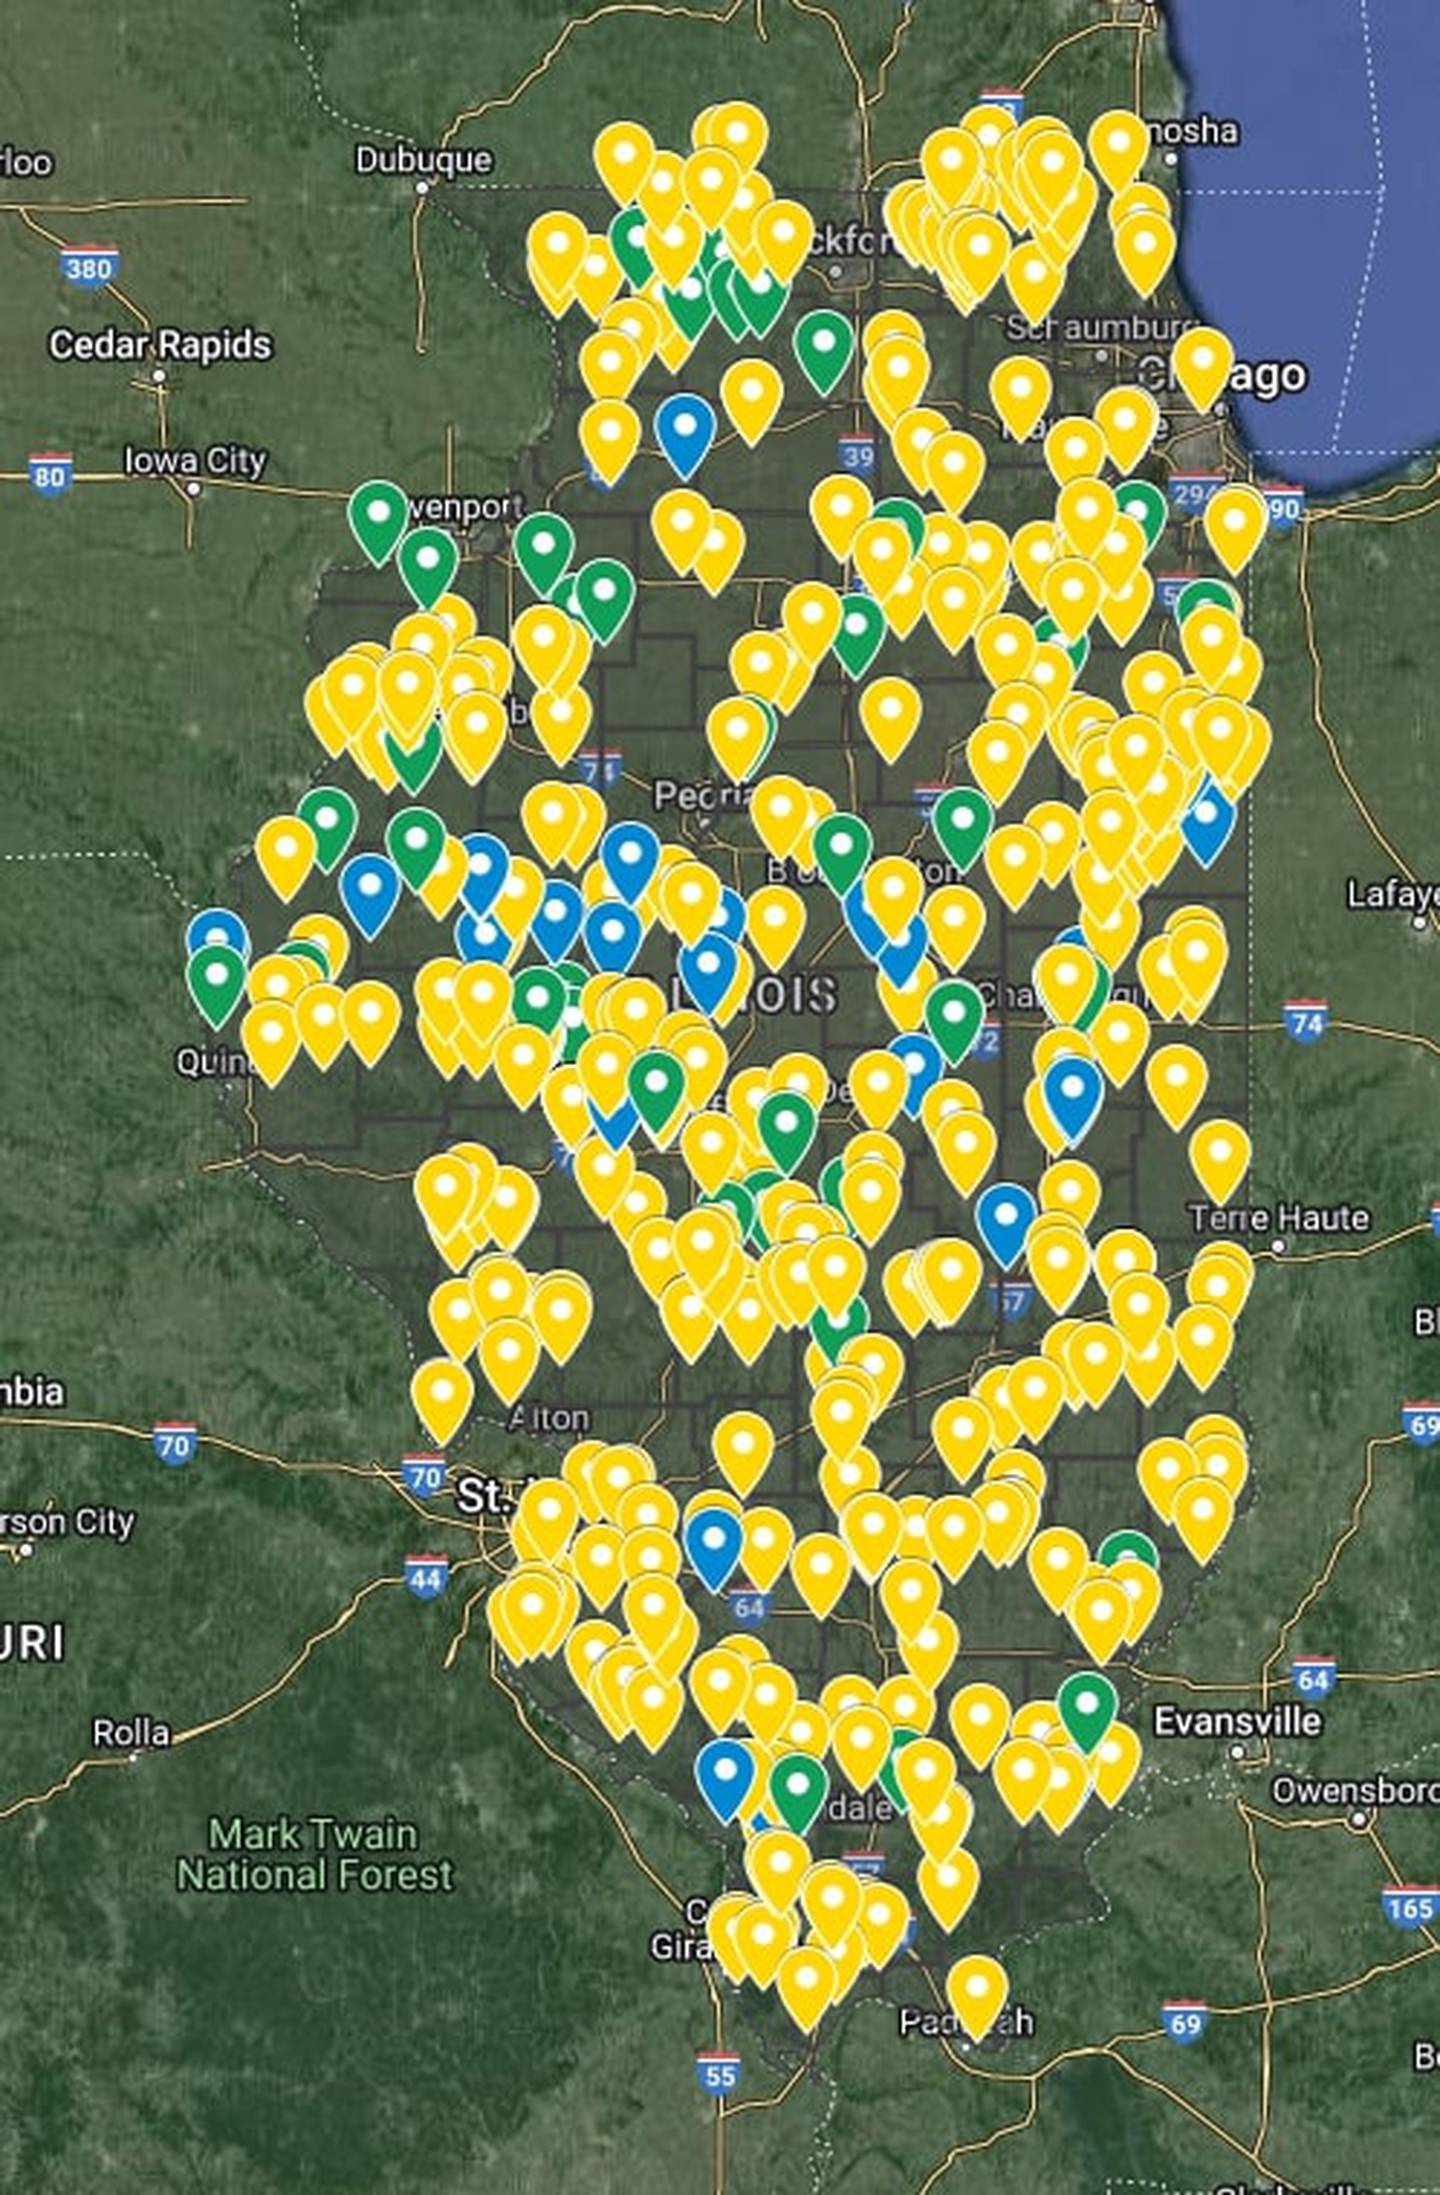 The 453 locations across Illinois of soil samples taken as long as 120 years ago that researchers are hoping to resample.